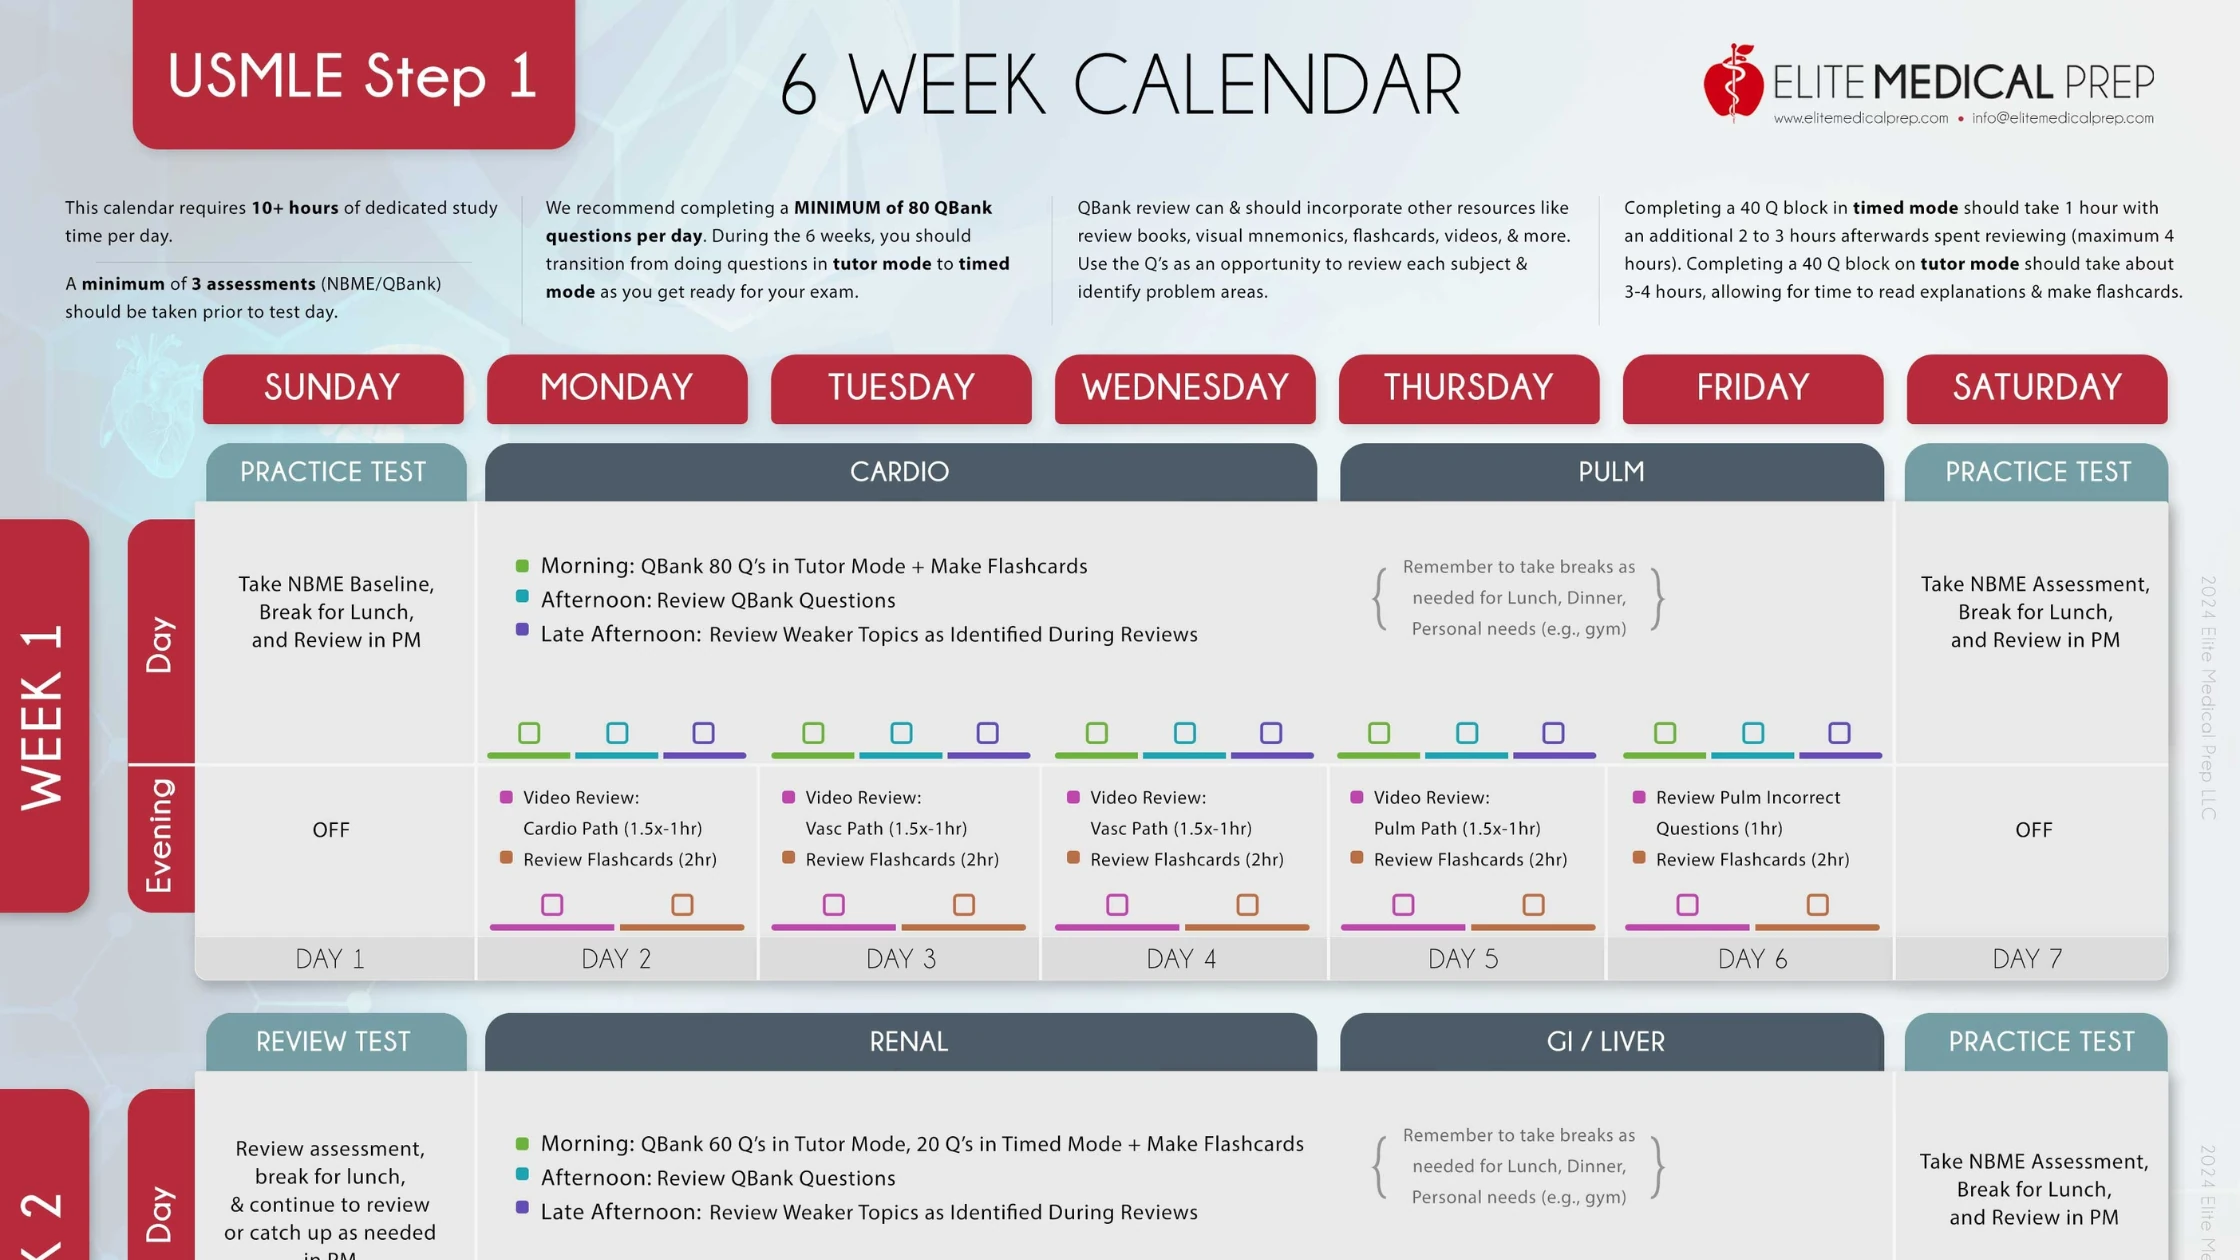 6-week Study Planner preview image for Step 1 by Elite Medical Prep.